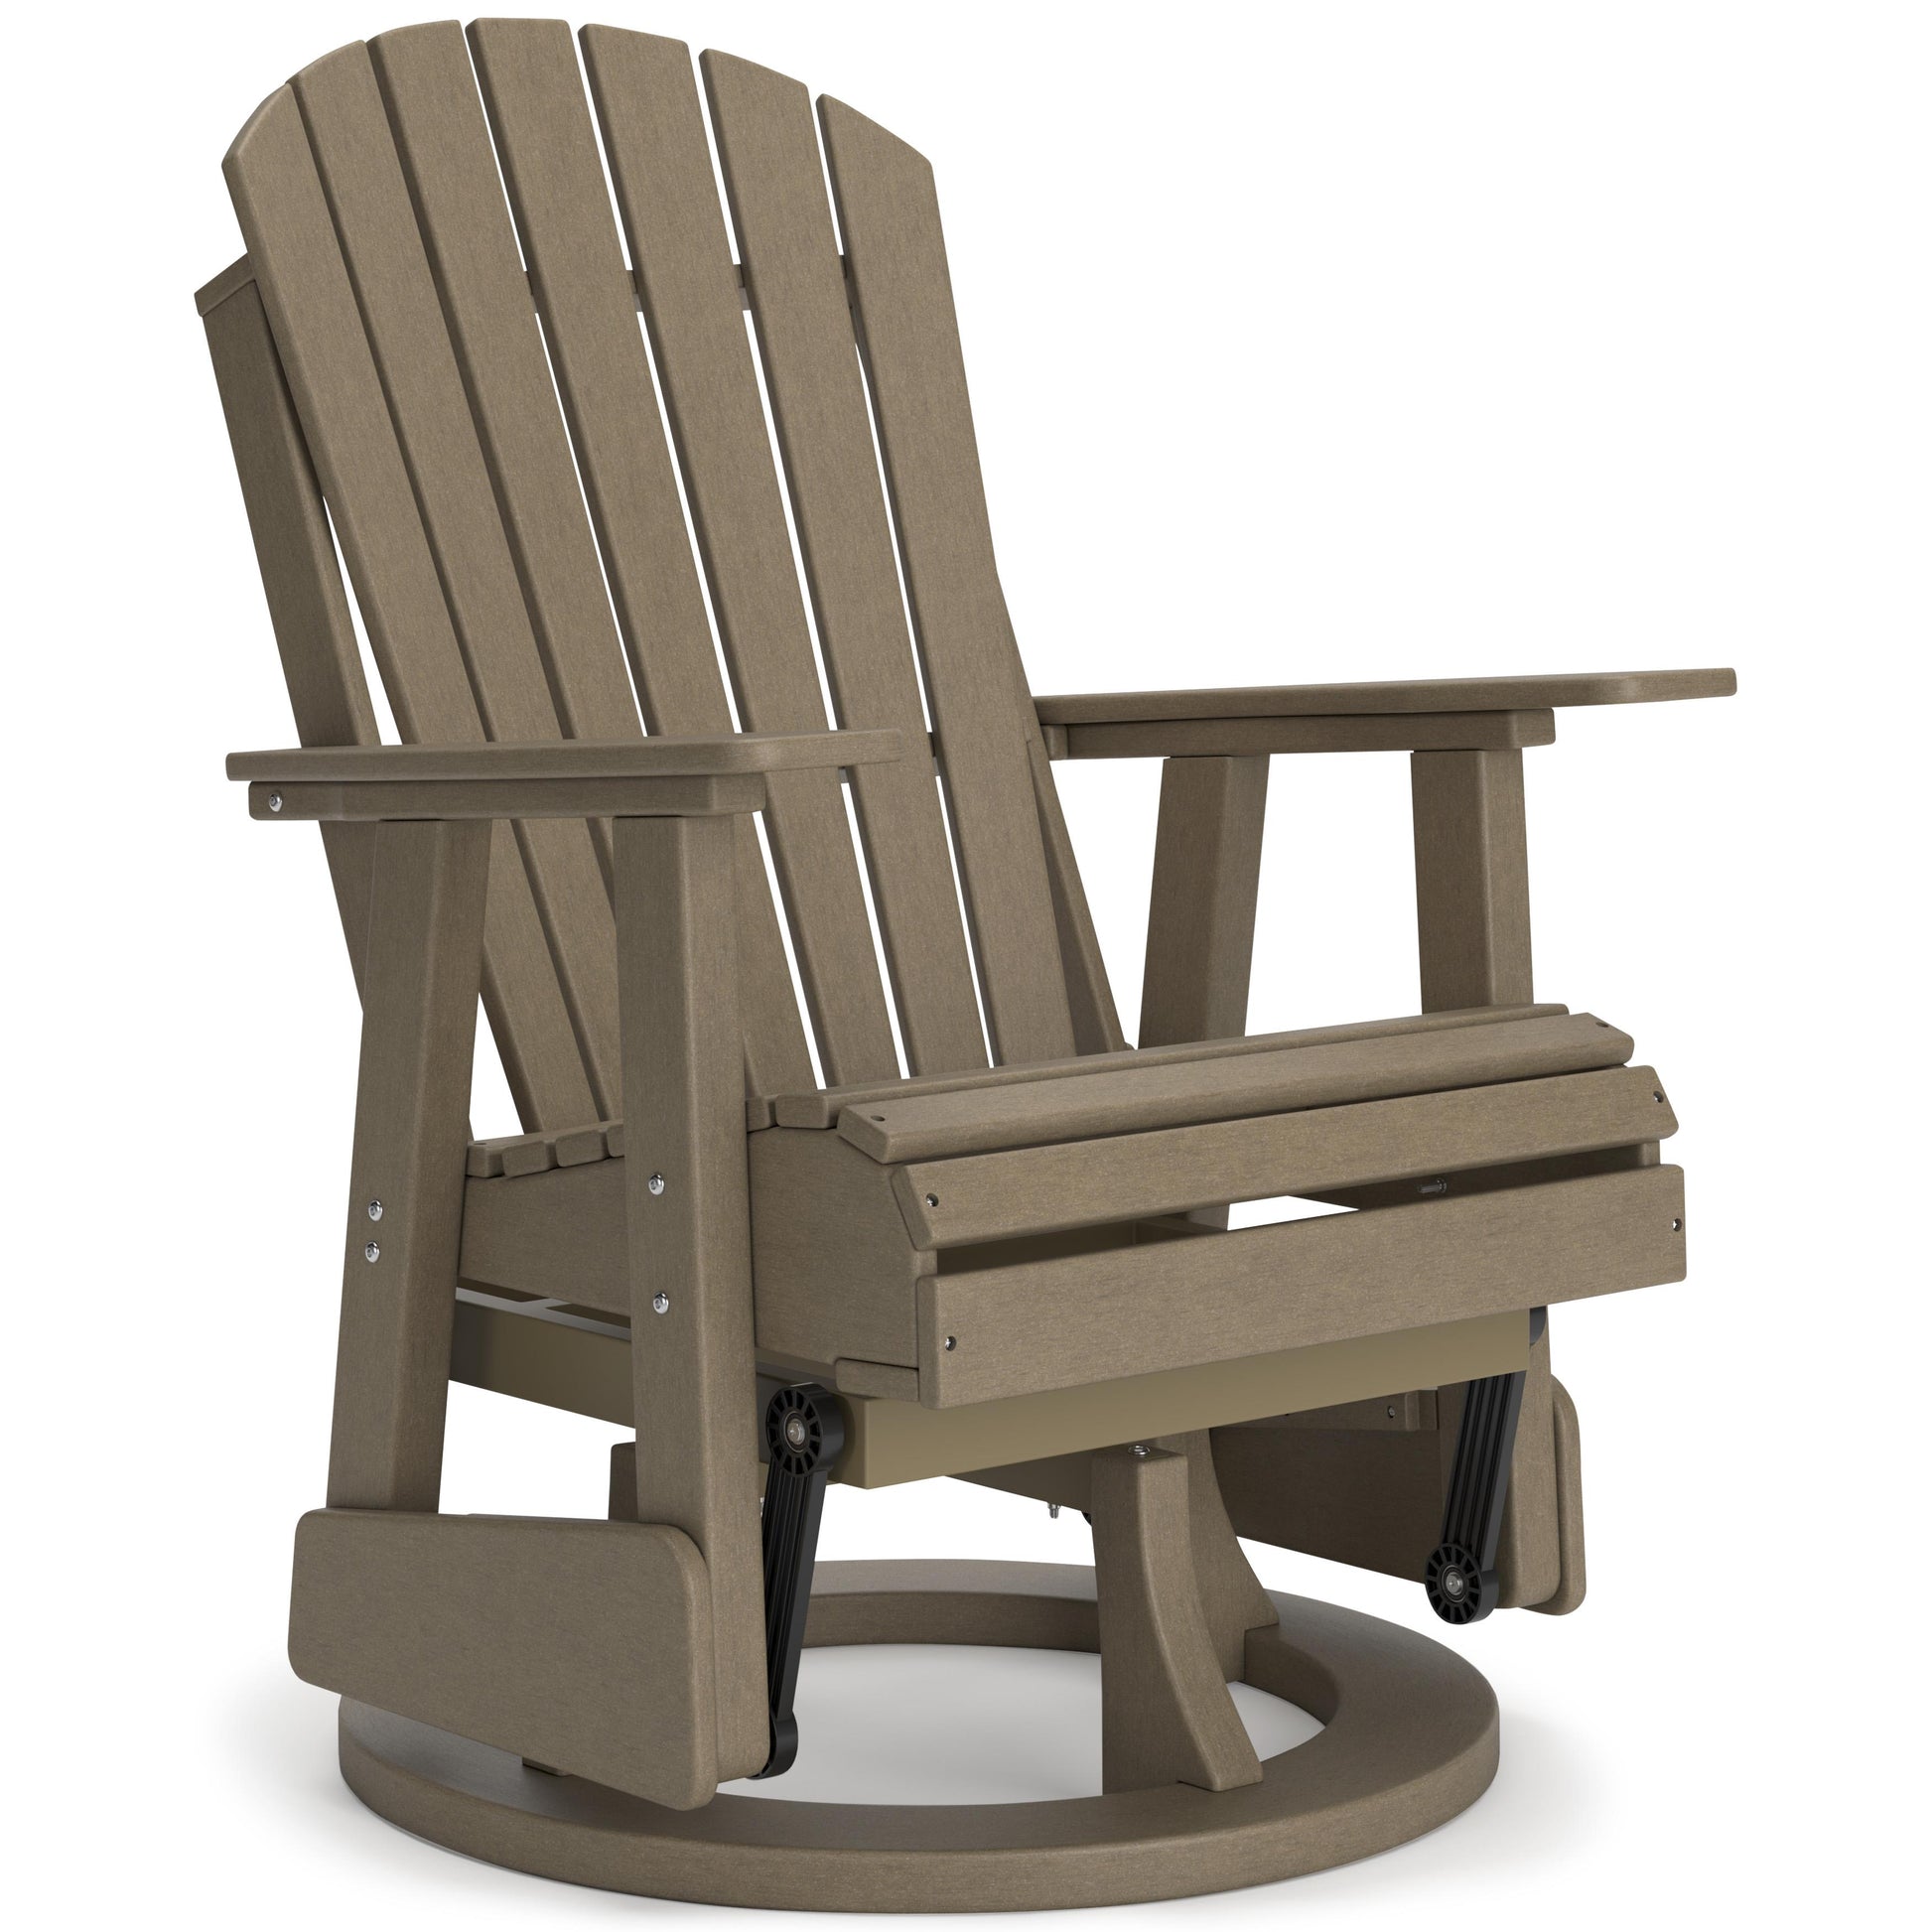 Signature Design by Ashley Outdoor Seating Chairs P114-820 IMAGE 1